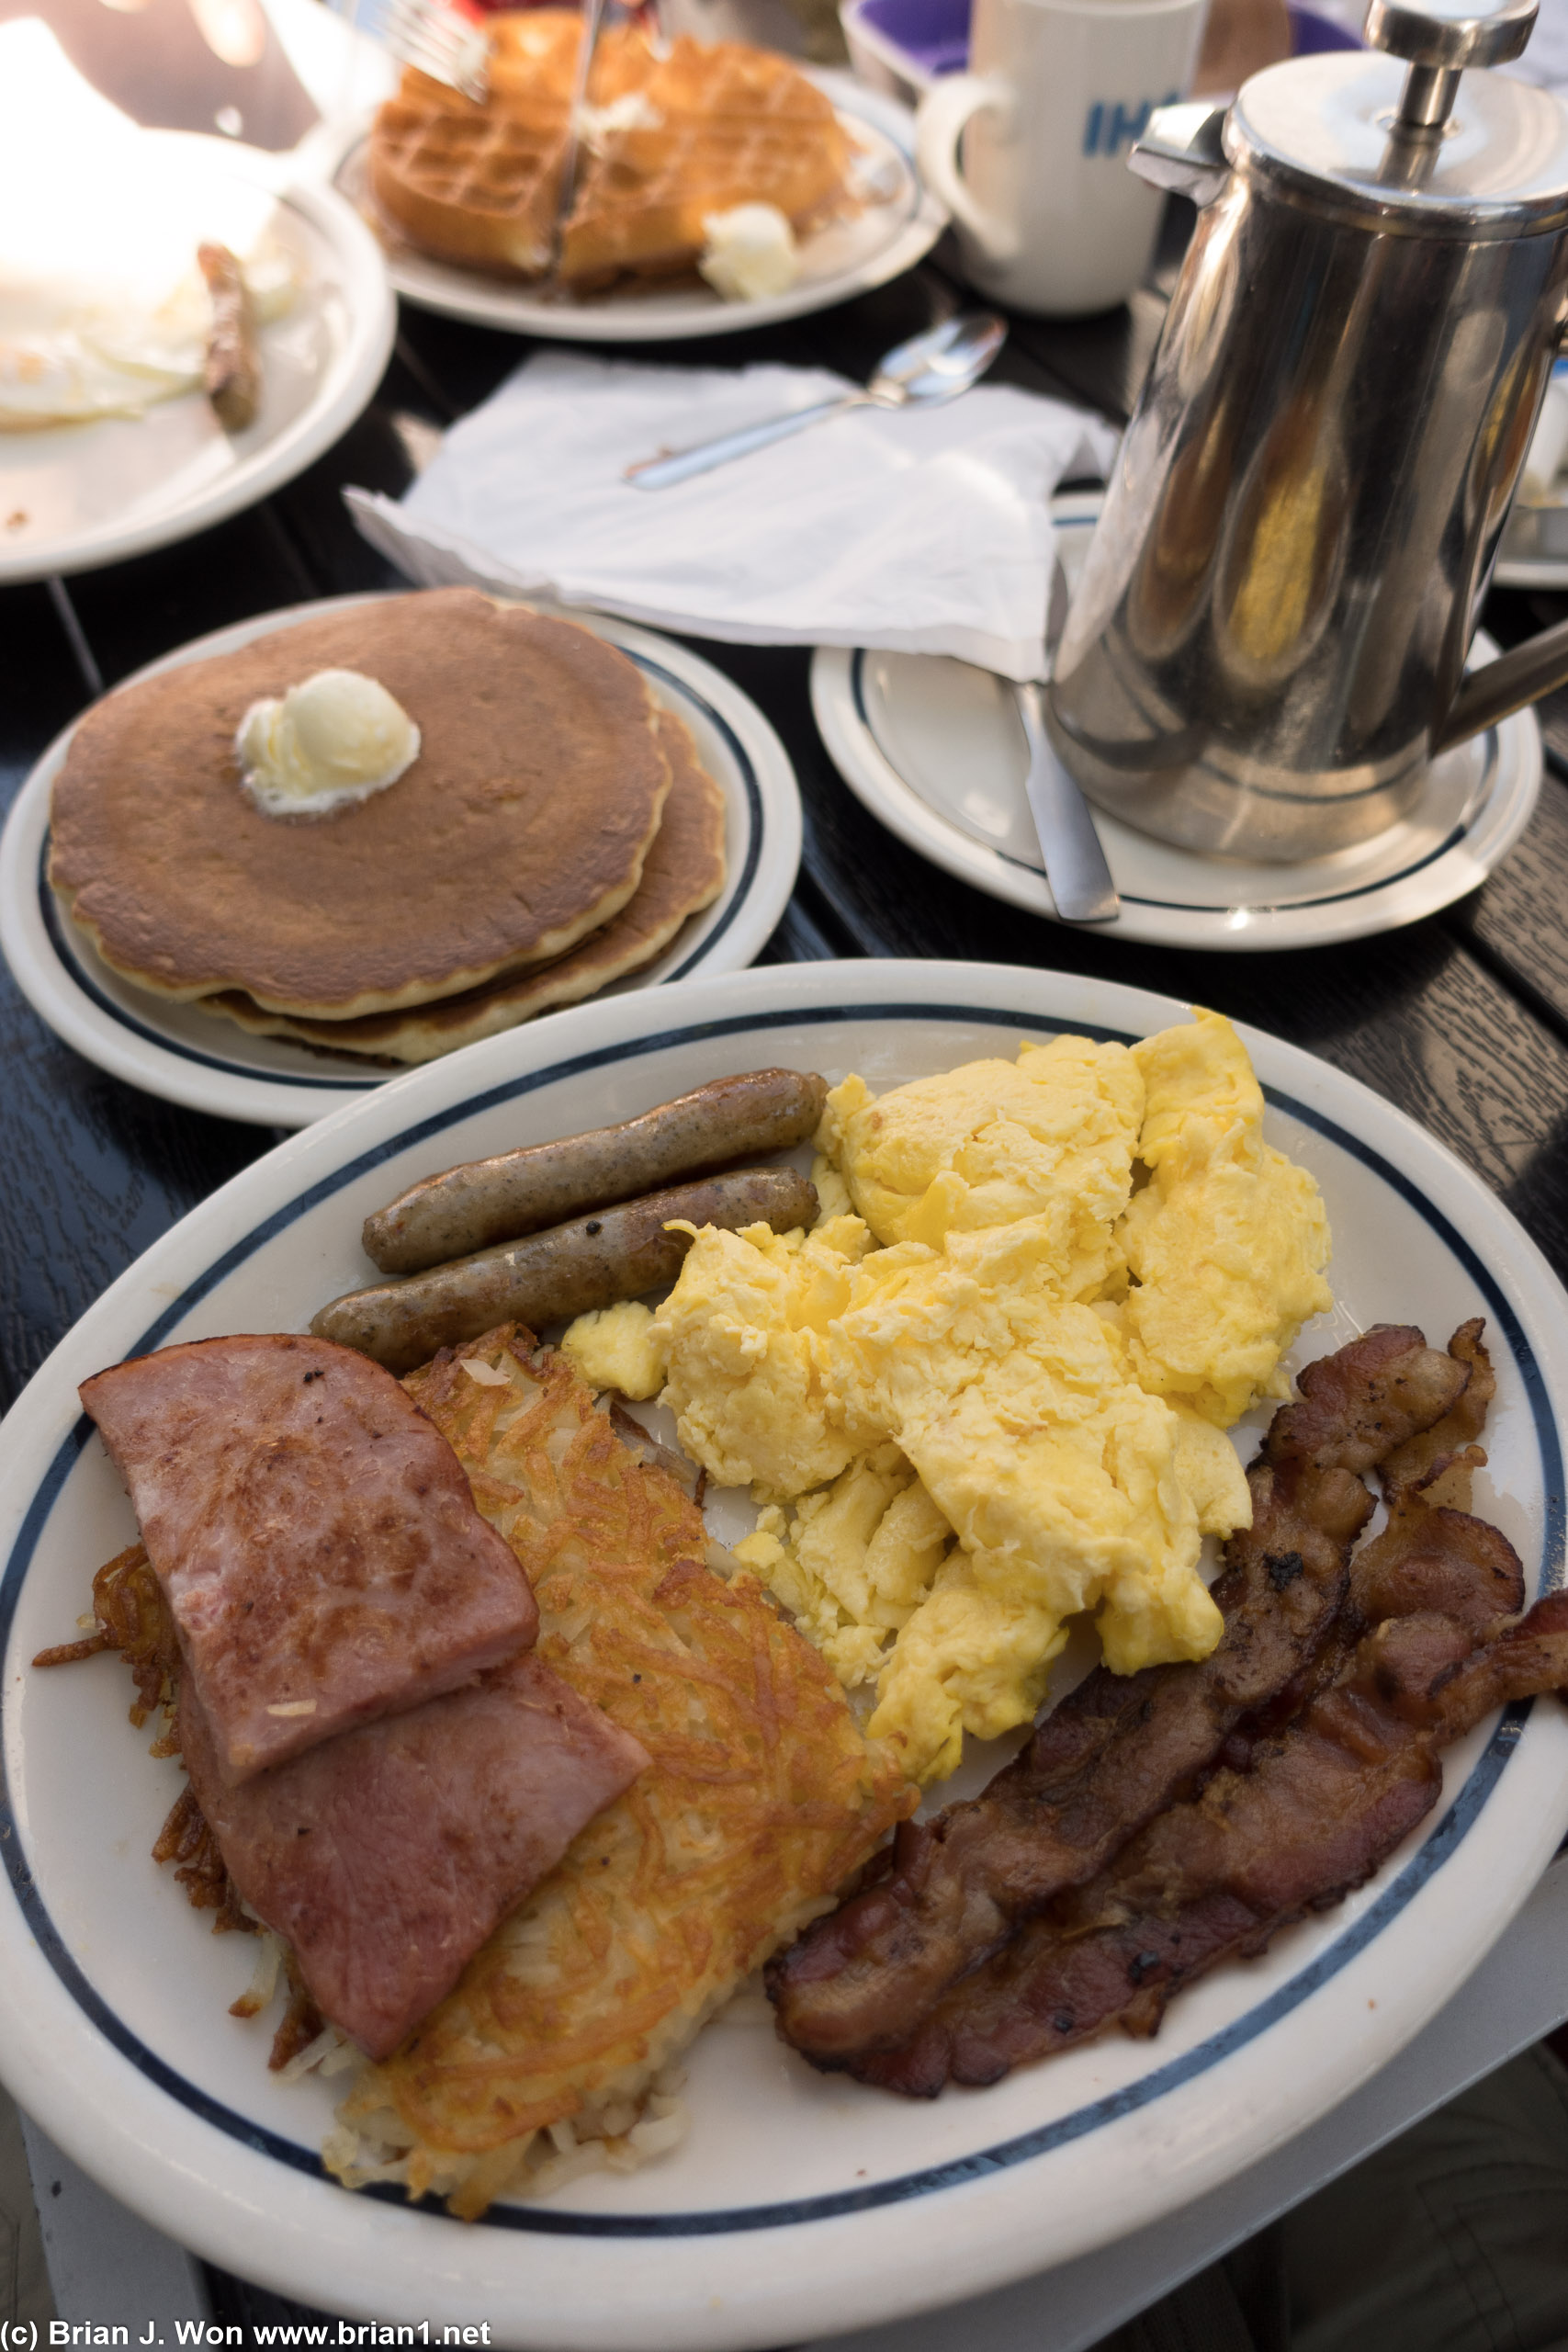 Breakfast sampler. Probably like 1,000,000 calories, 100 grams of sodium, and 10,000 grams of fat.